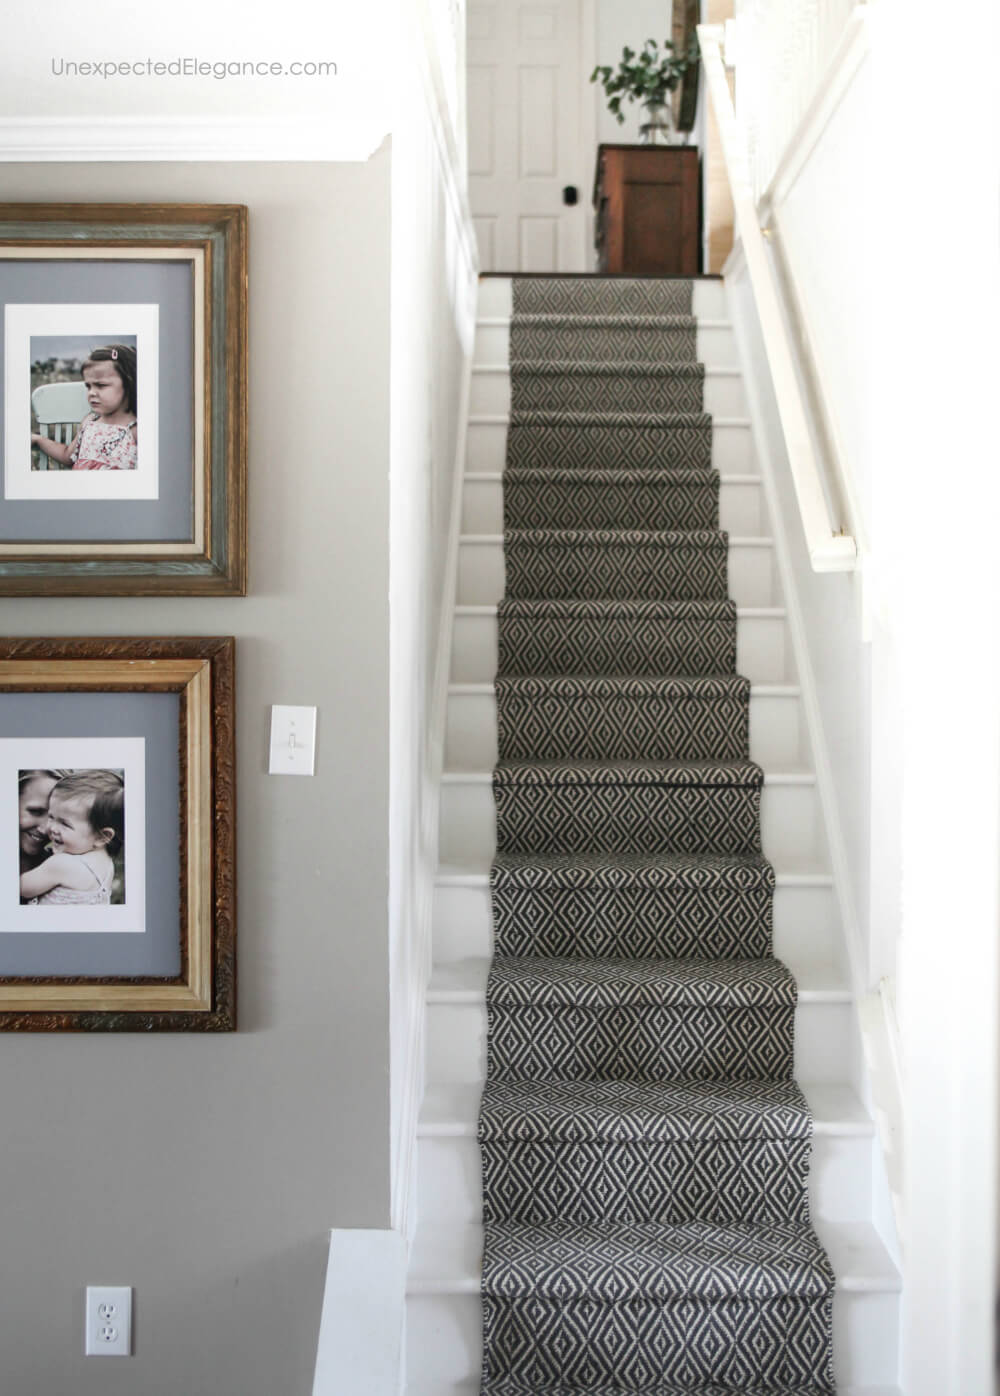 How To Replace Carpet With An Inexpensive Stair Runner For Around 100,How Long Do Cats Live In A House